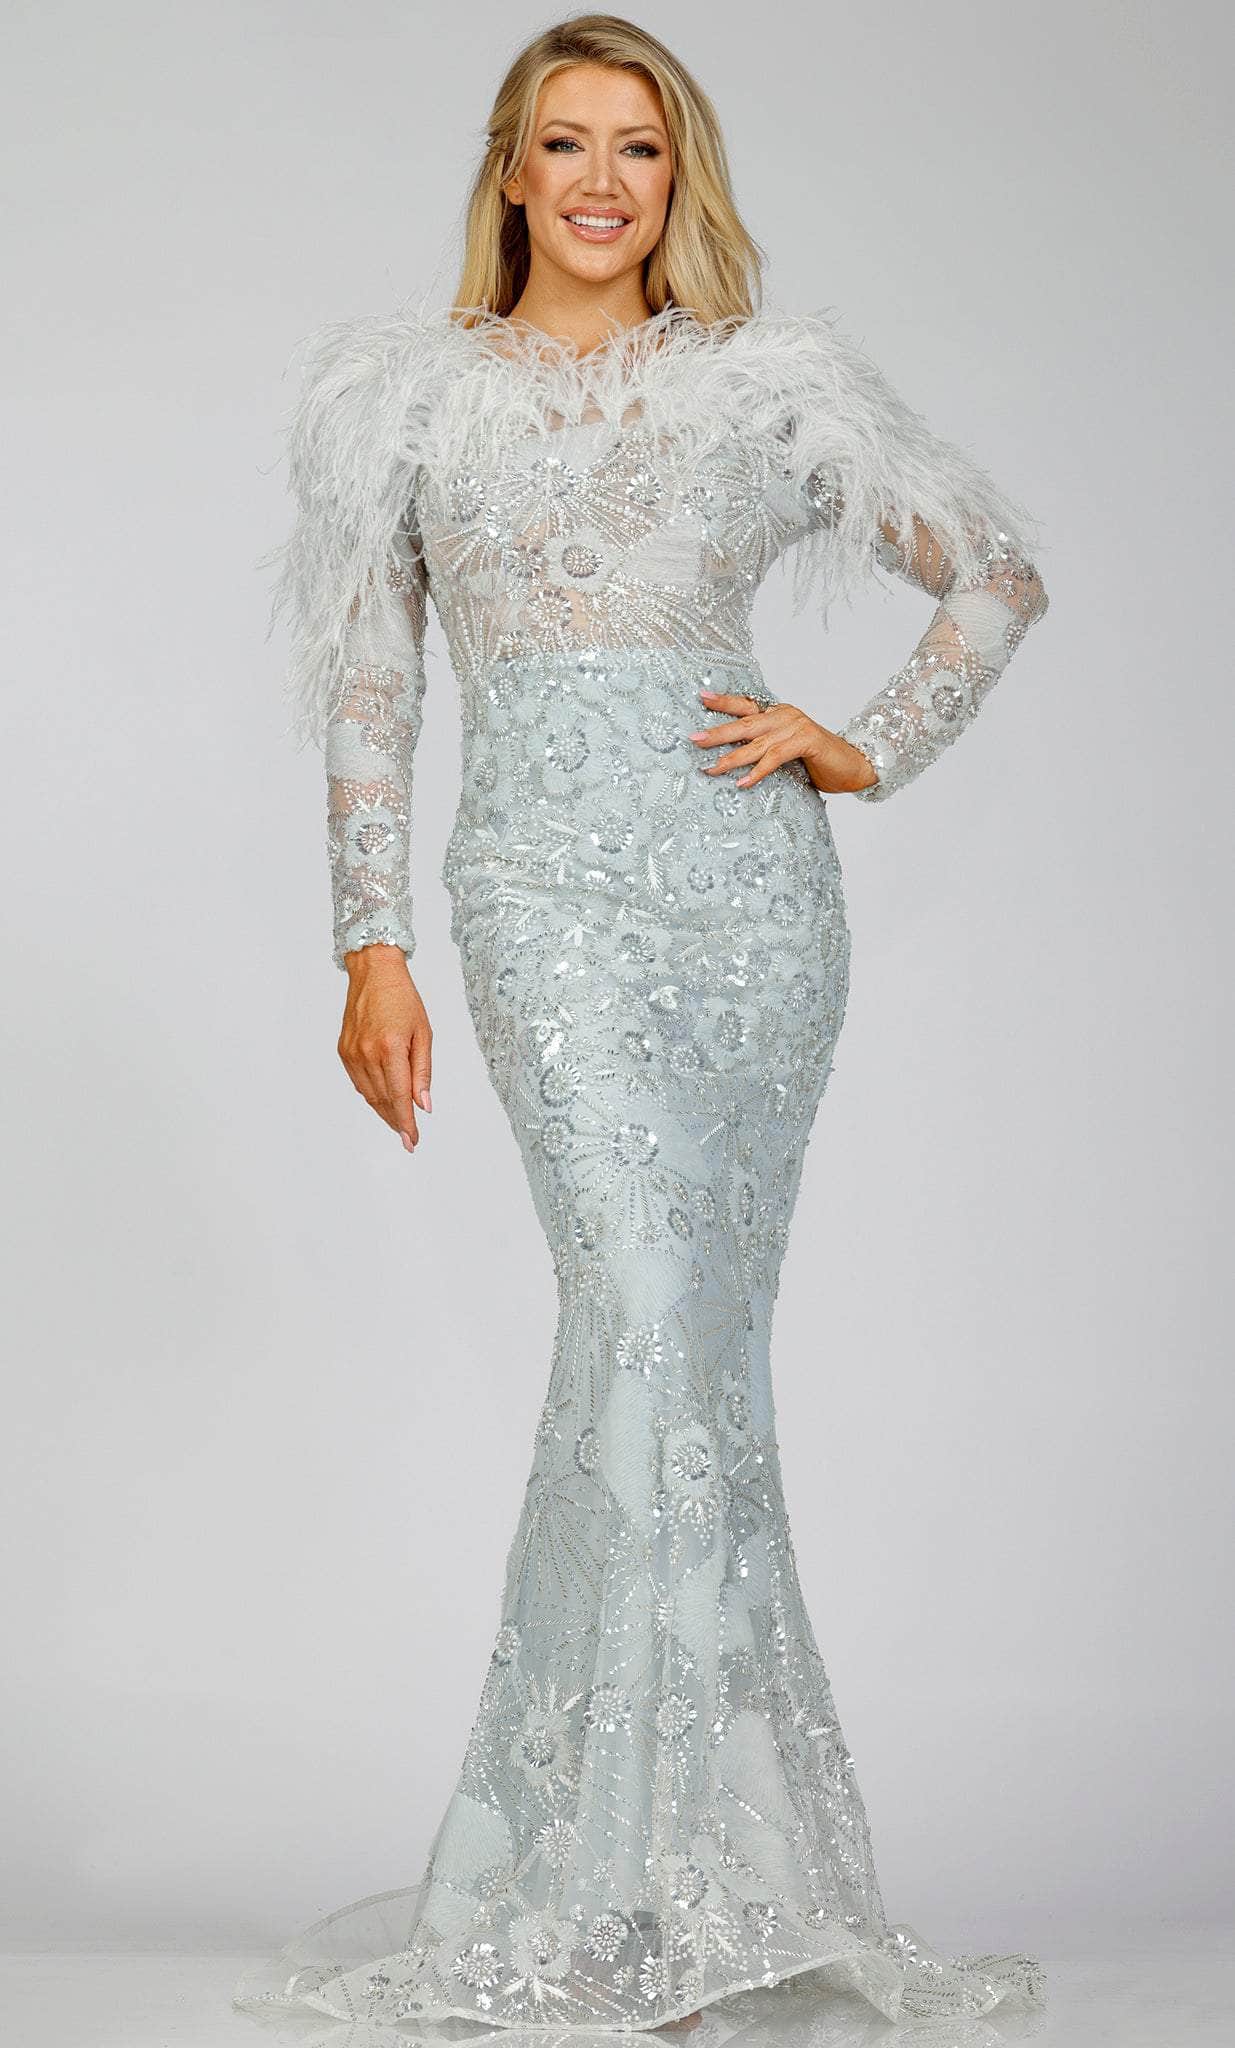 Image of Terani Couture 231M0491 - Fur Ornate Mermaid Evening Gown